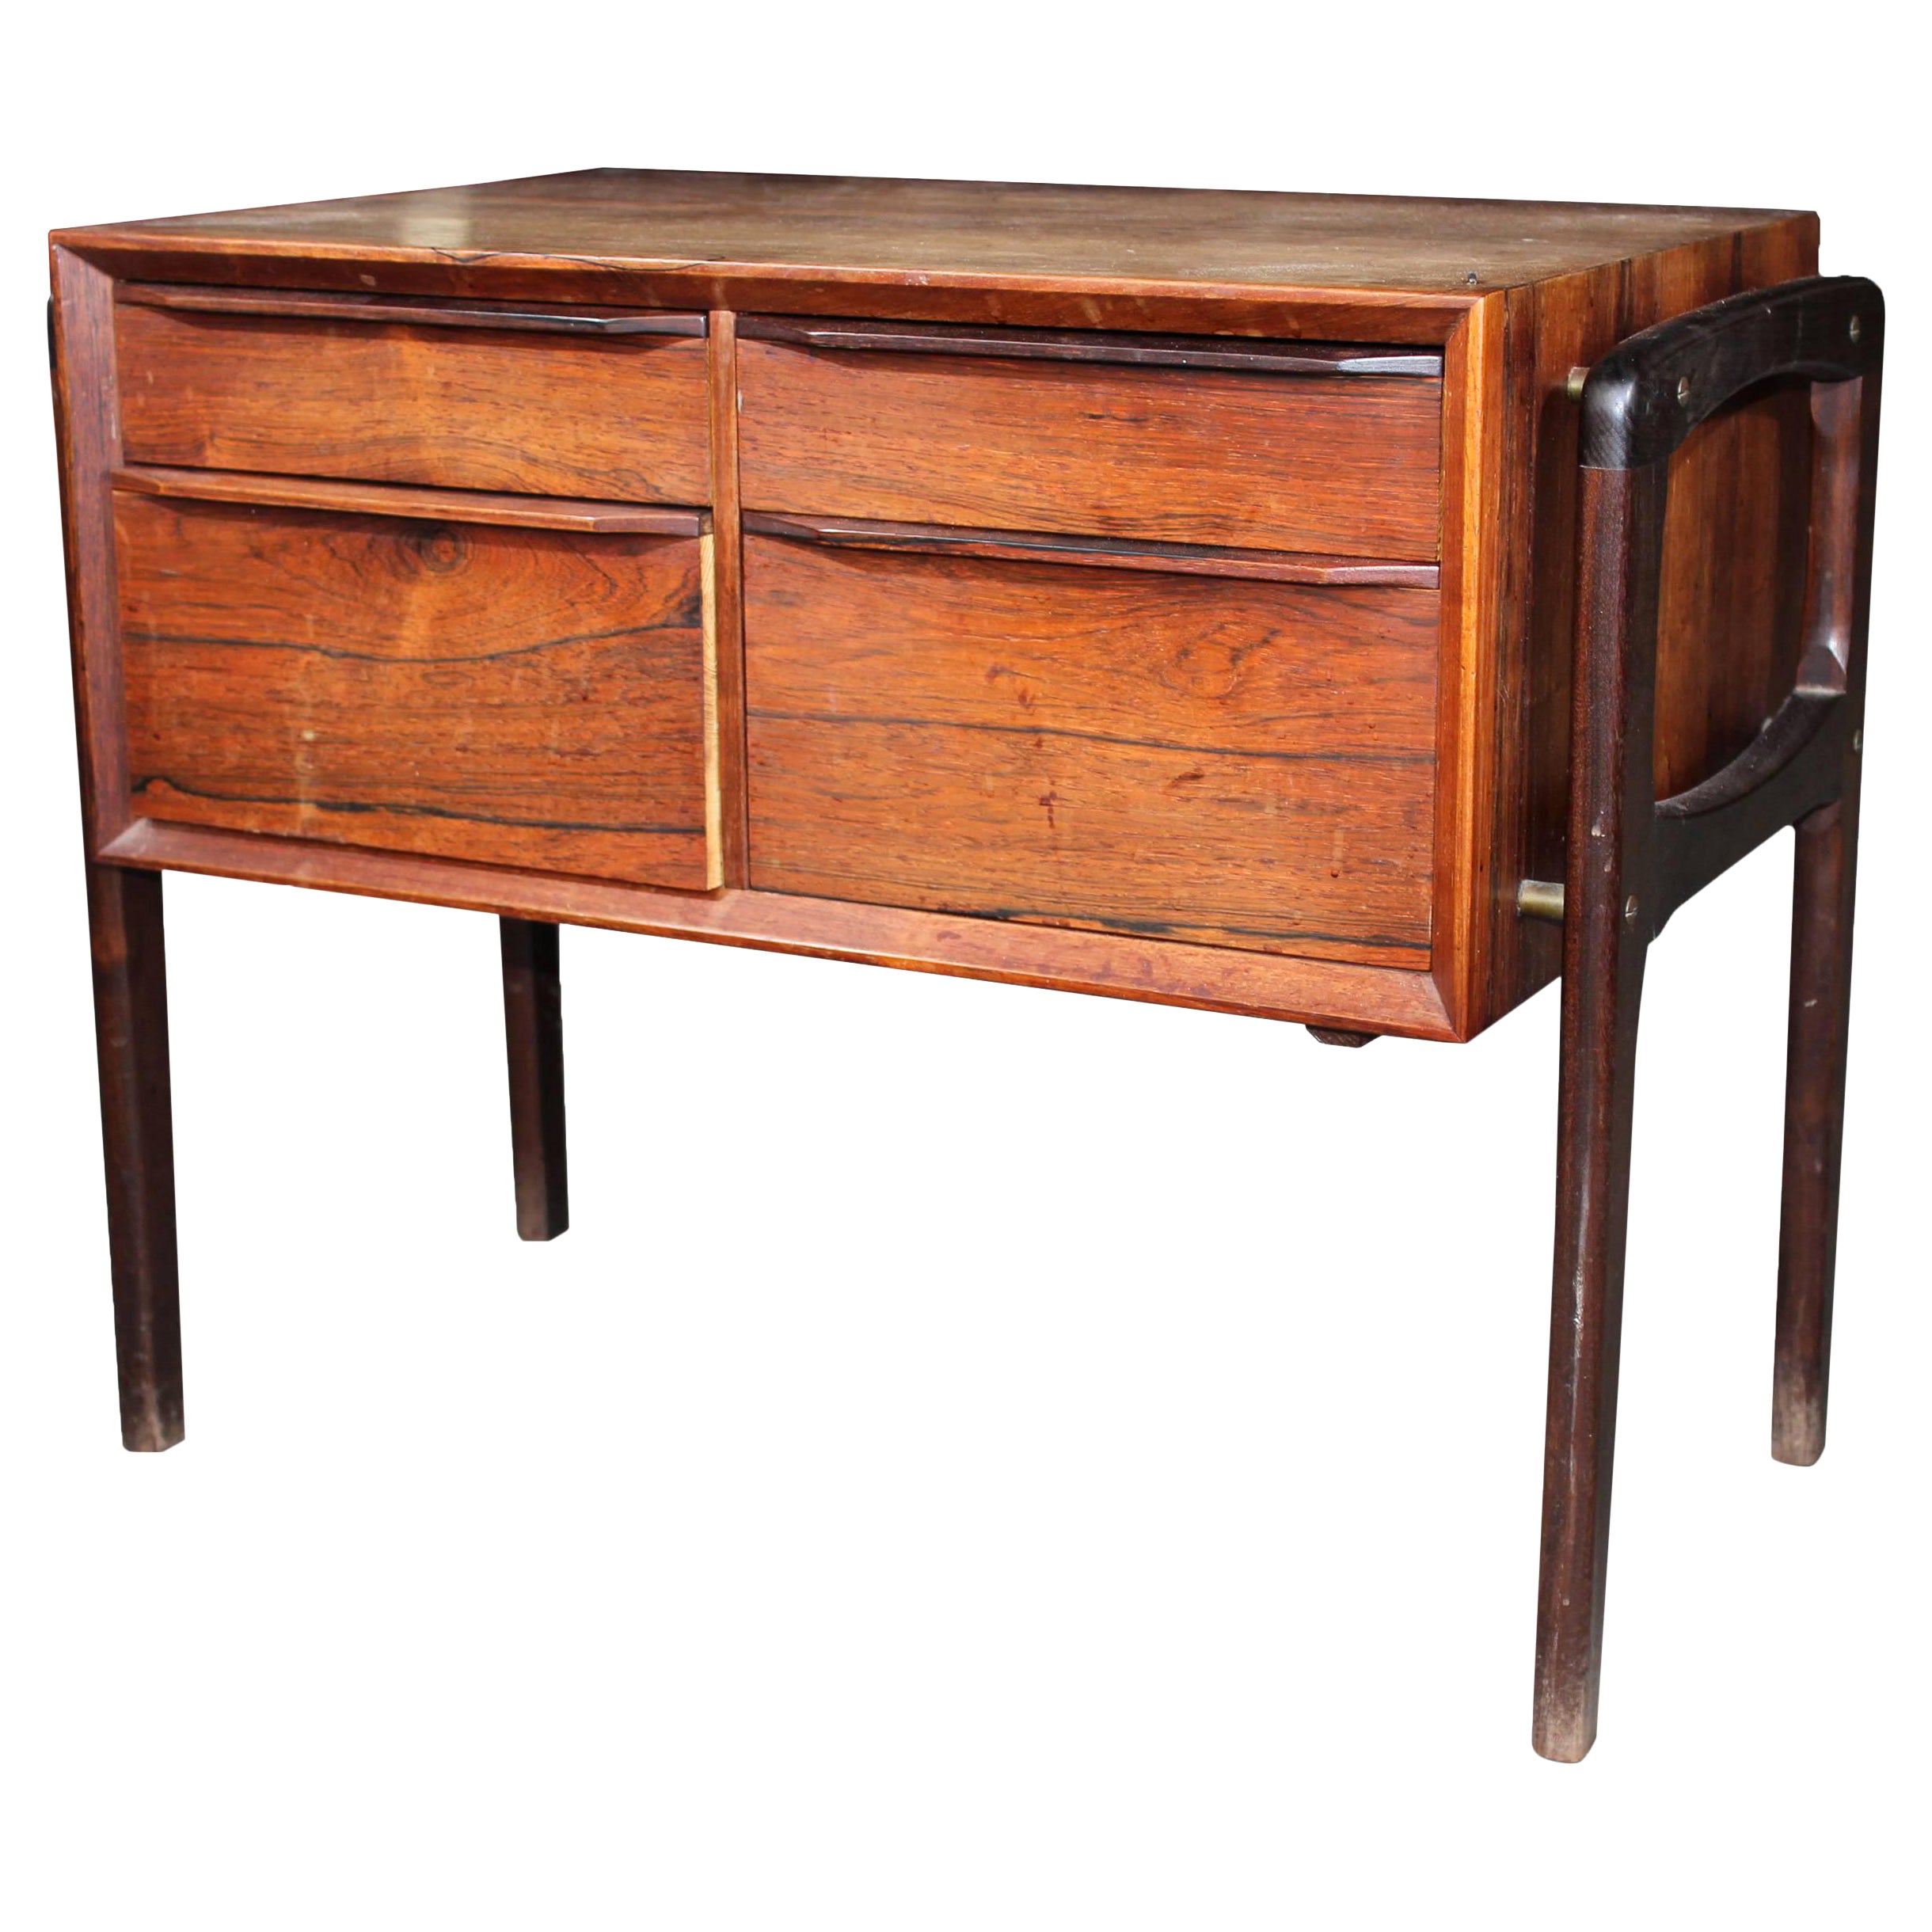 1950s, Vintage Scandinavian Rosewood Side Table with Four Drawers